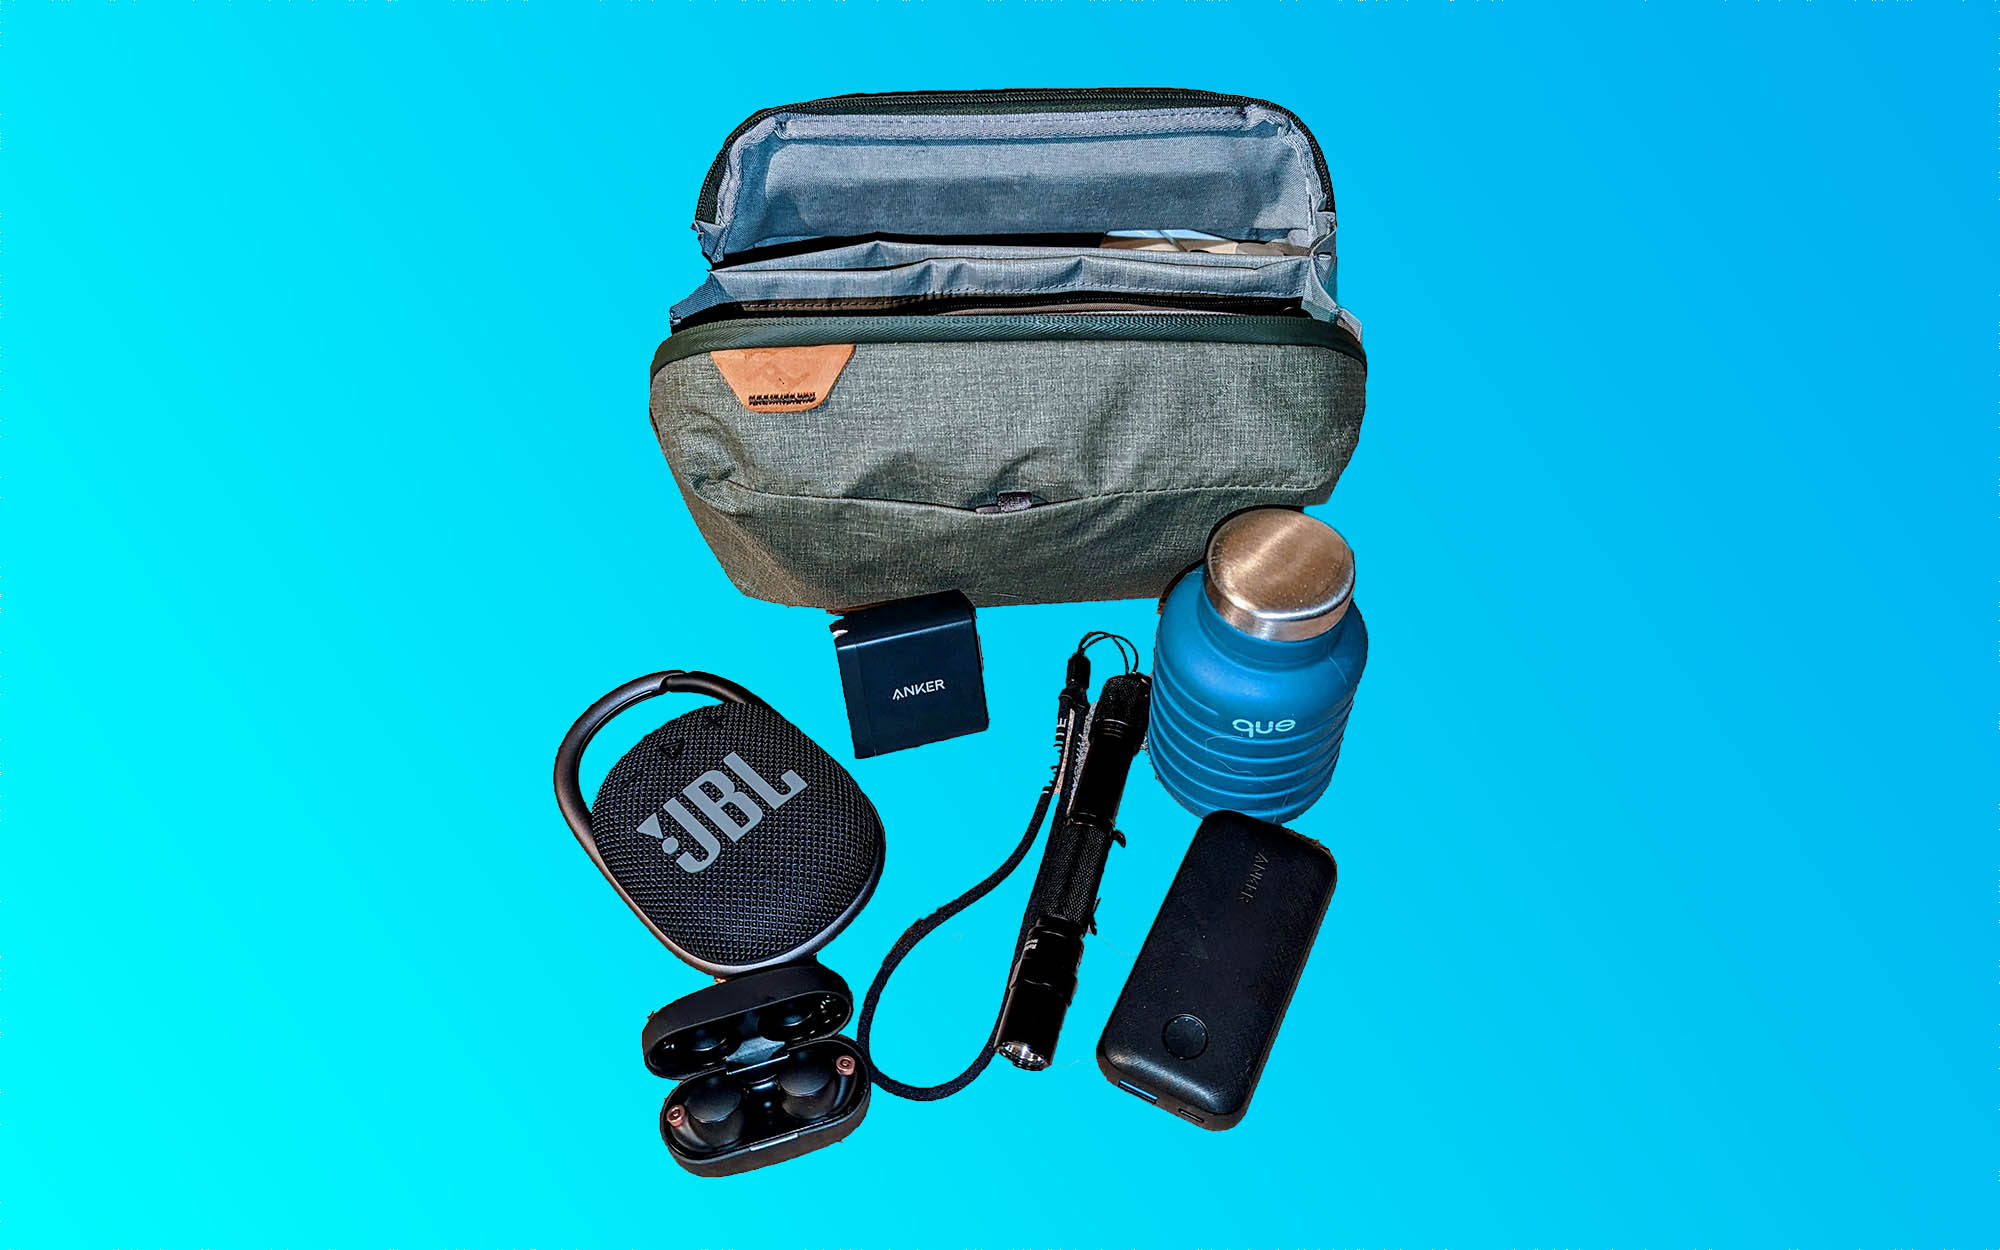 The Best Travel Gadgets – Lost in the Right Direction